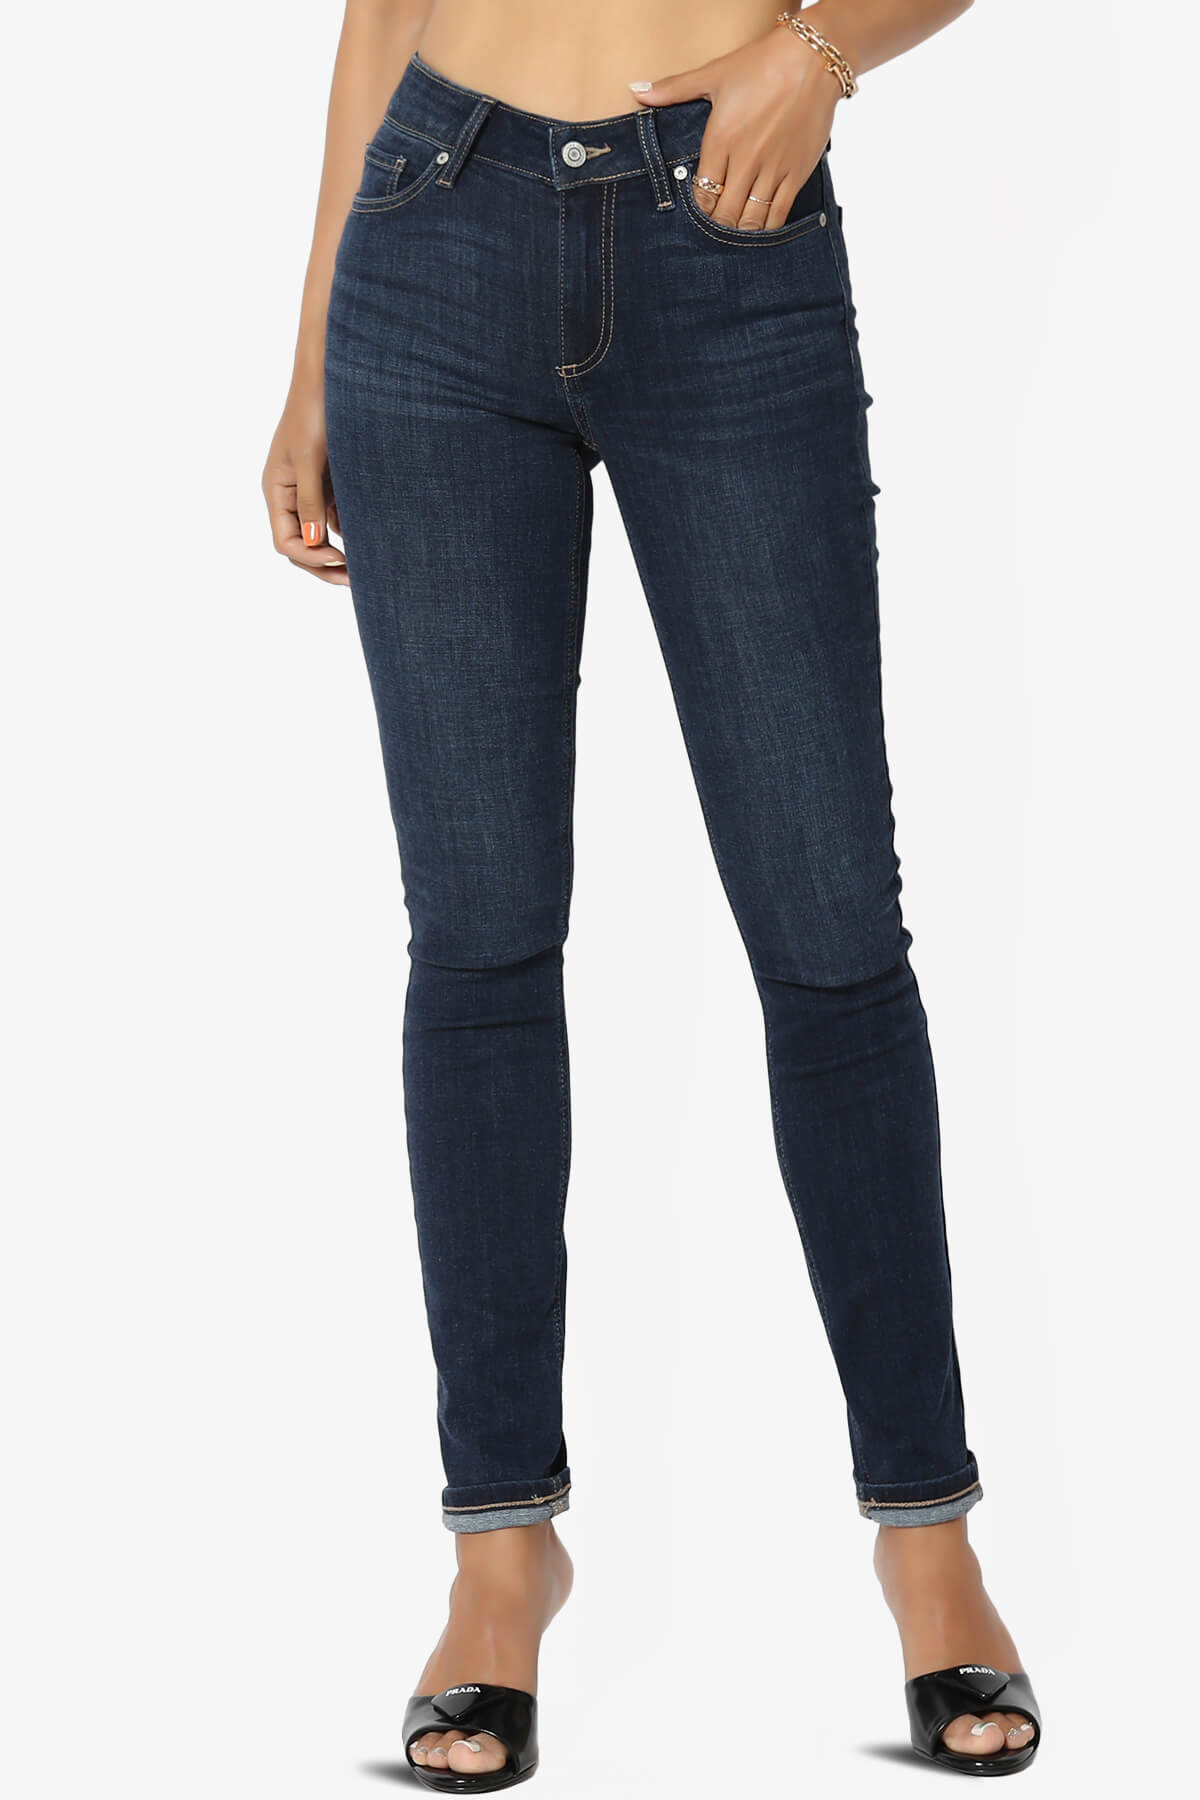 Jude Mid Rise Ankle Skinny Jeans in Bseat DARK_1